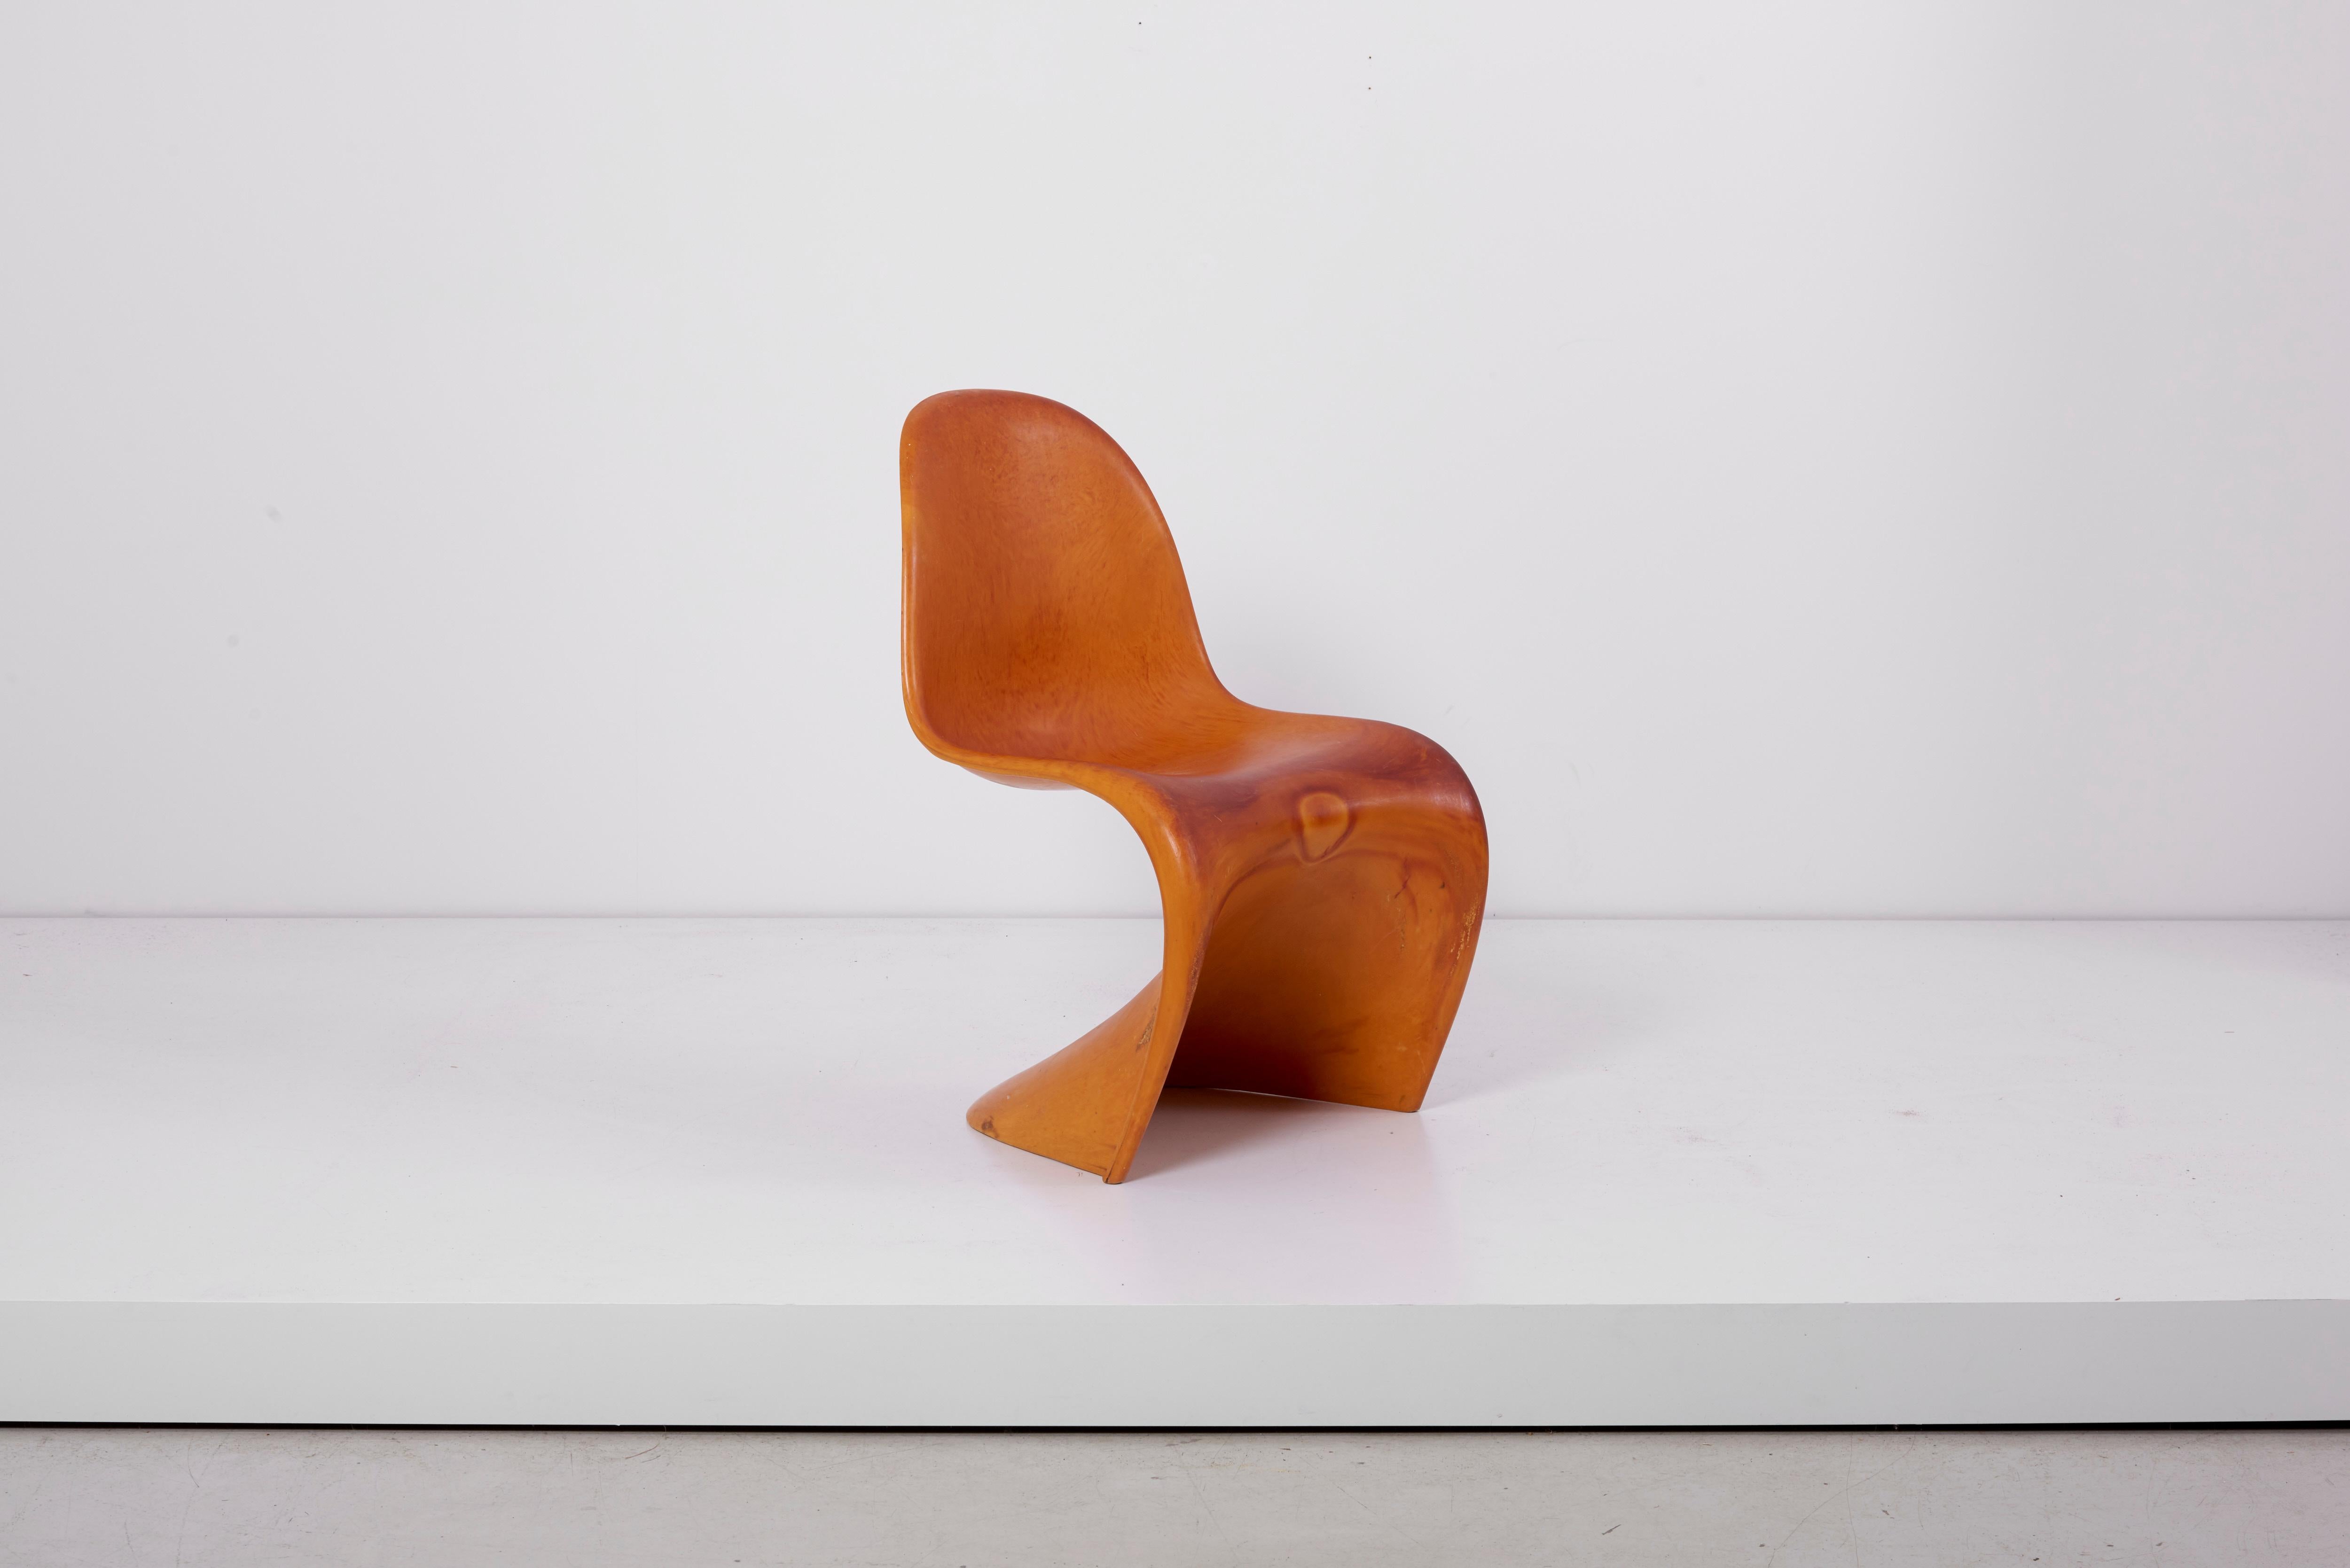 Space Age Workpiece of the Panton Chair by Verner Panton for Vitra, Germany, circa 1968